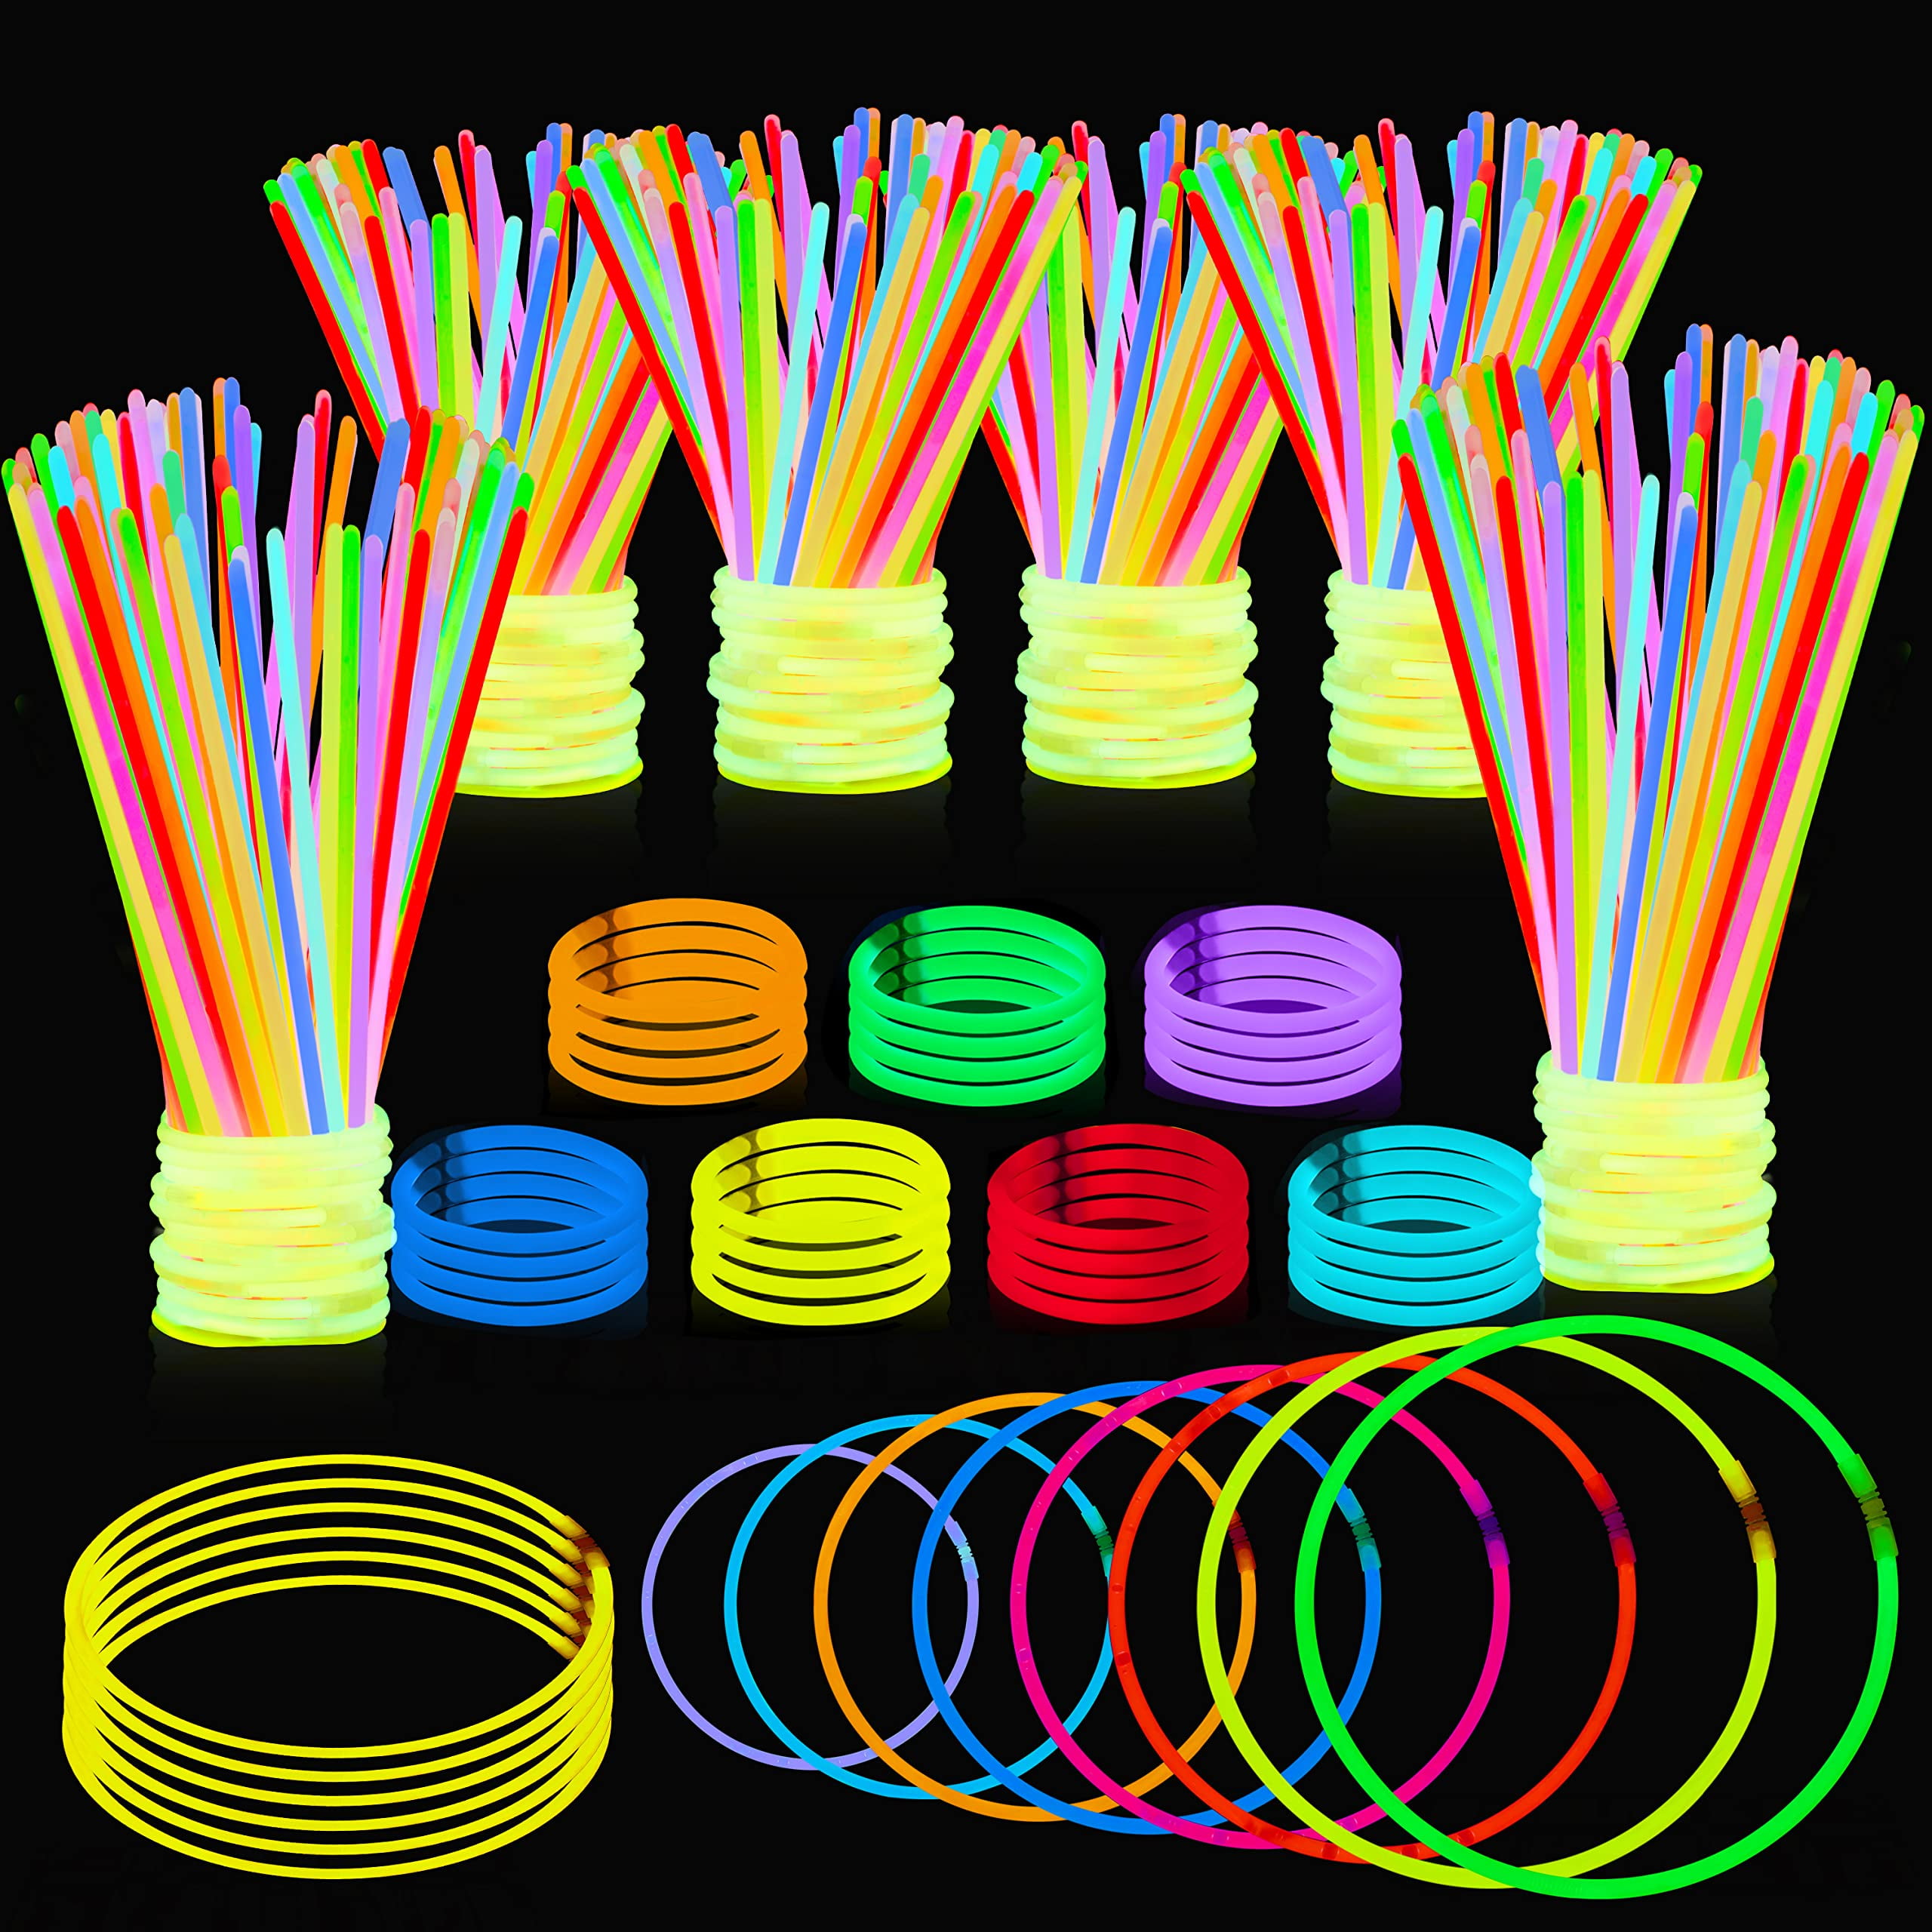 Glow Sticks Party Supplies Favors Decorations 100Pk - 8 inch Glow in The Dark Light Up Sticks, Neon Party Glow Necklaces and Bracelets W/Connectors